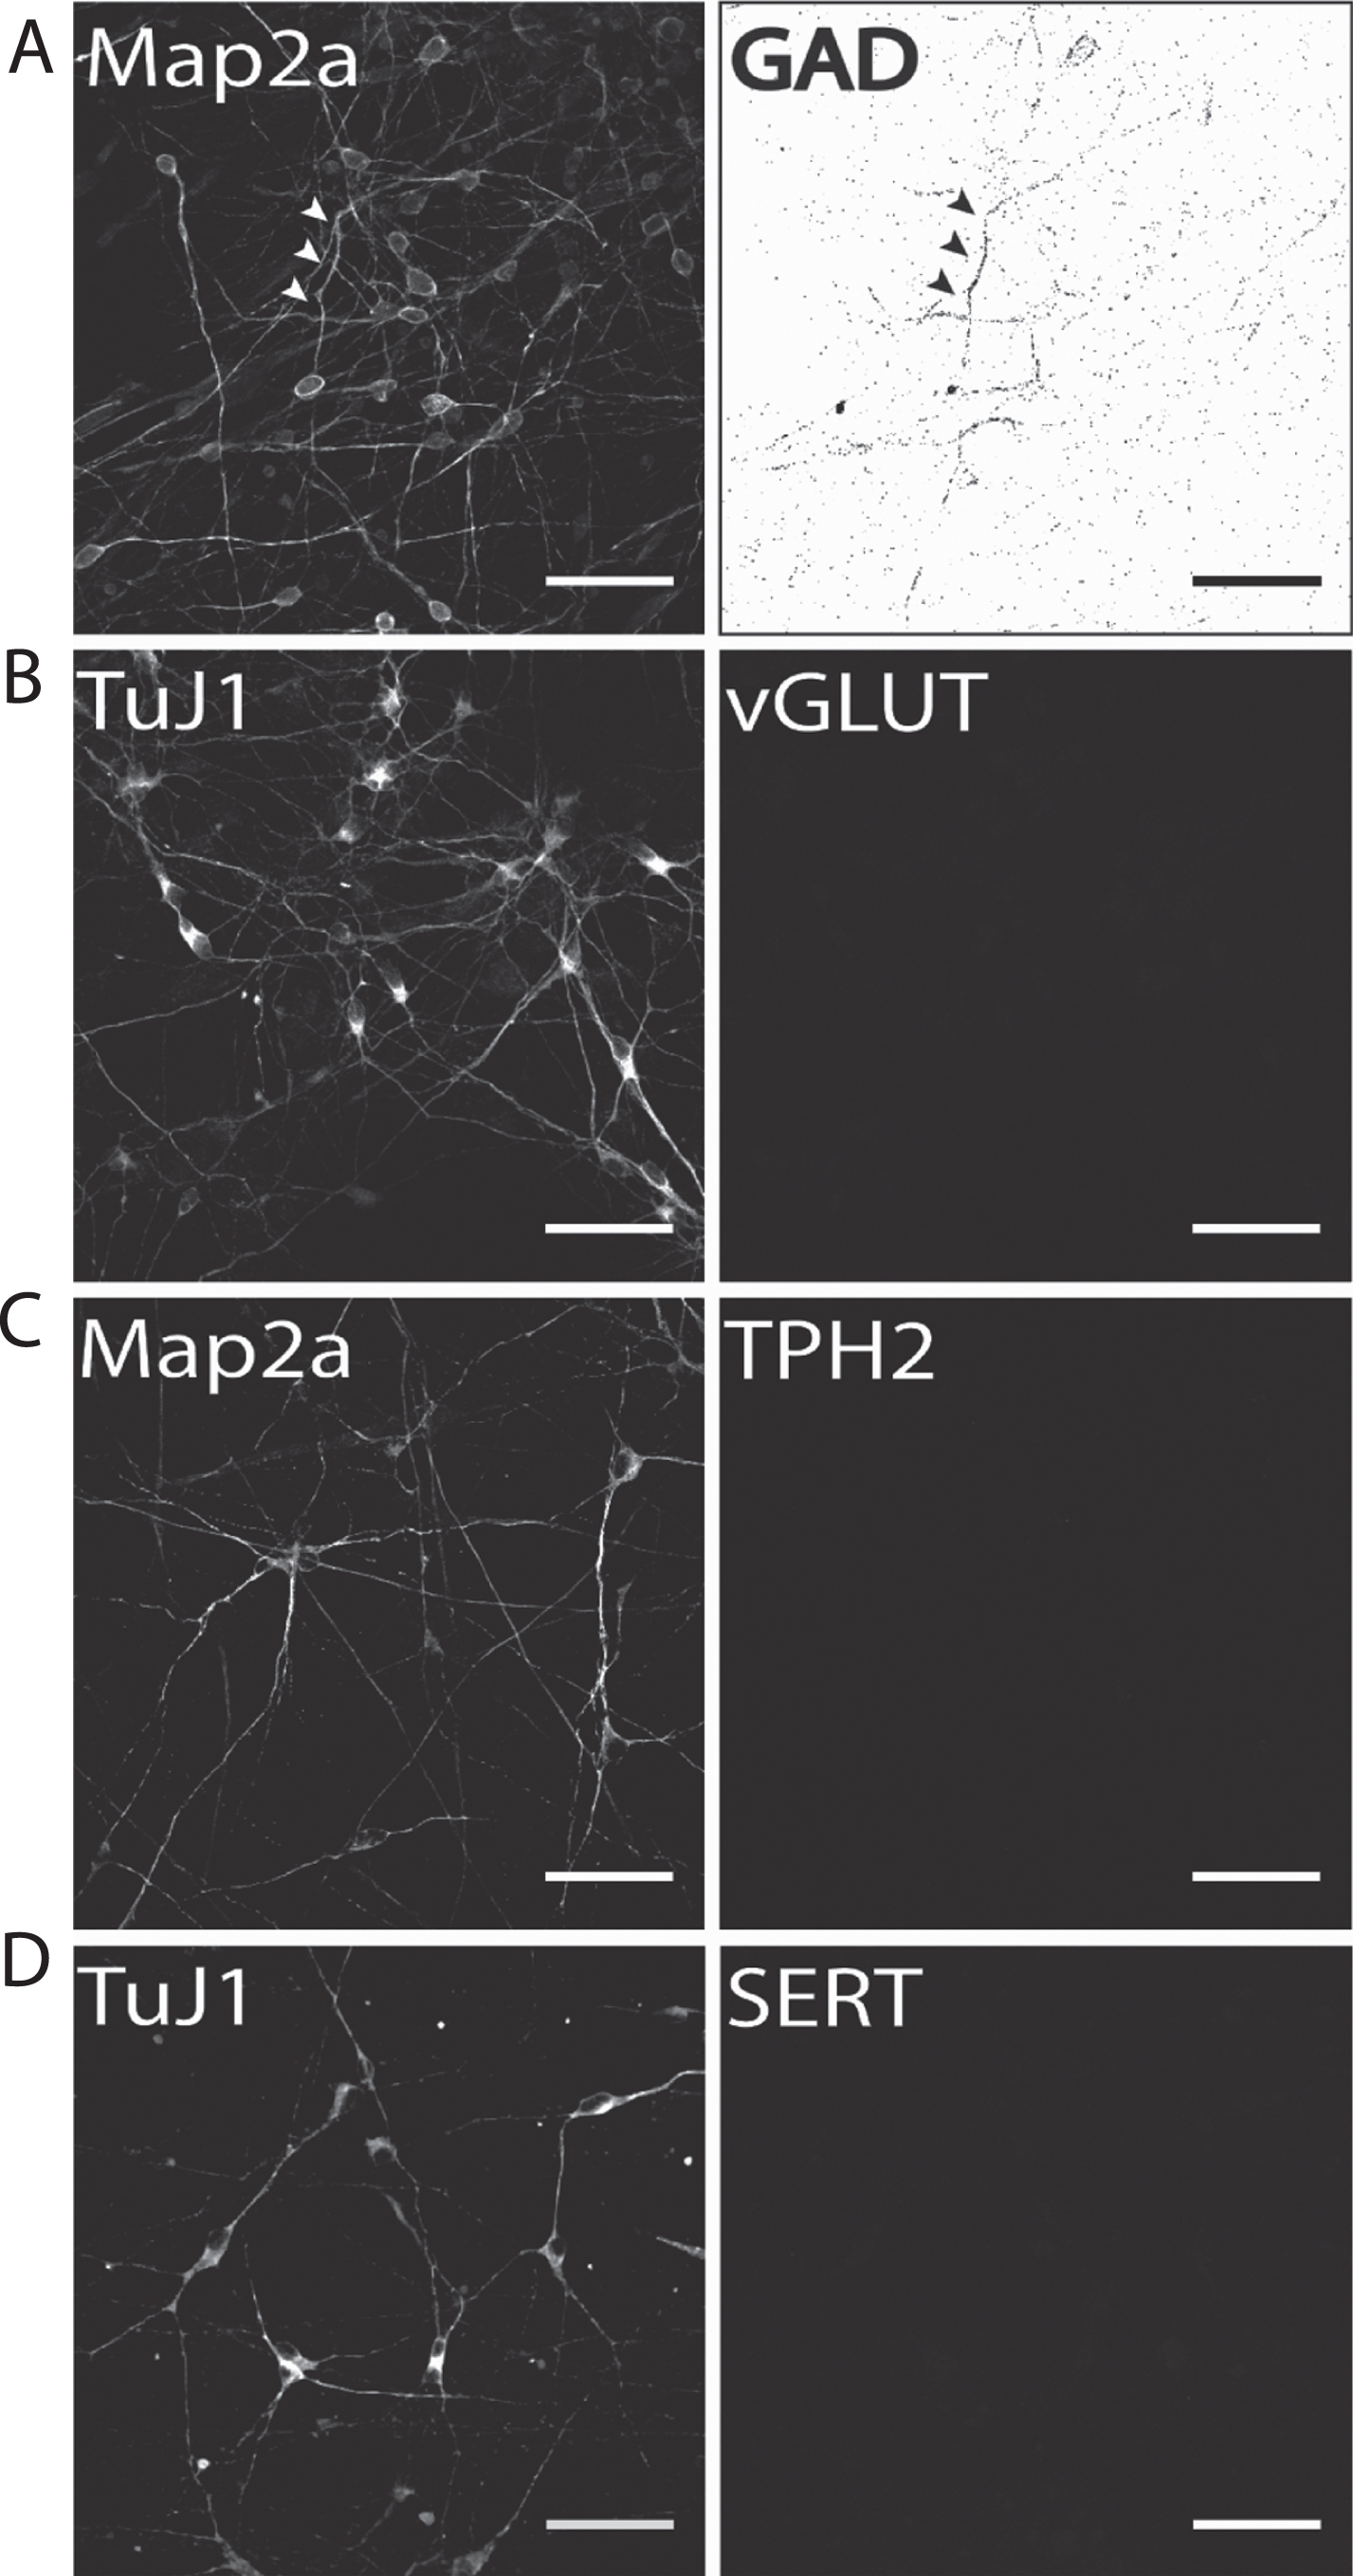 Identification of potential subpopulations in hiPS cell-derived neuronal cultures. Exemplary images of terminally differentiated hiPS cell-derived neurons are shown (d50). (A) GAD1 as GABA-ergic marker, (B) vGLUT1 as a glutamatergic marker, and (C) TPH2 and (D) SERT as marker proteins for serotonergic subpopulations. Except for GAD1, no cells were positively stained for any of the other tested markers, indicating a predominantly DA neurons phenotype for neurons generated with our protocol. Scale bar: 50μm.